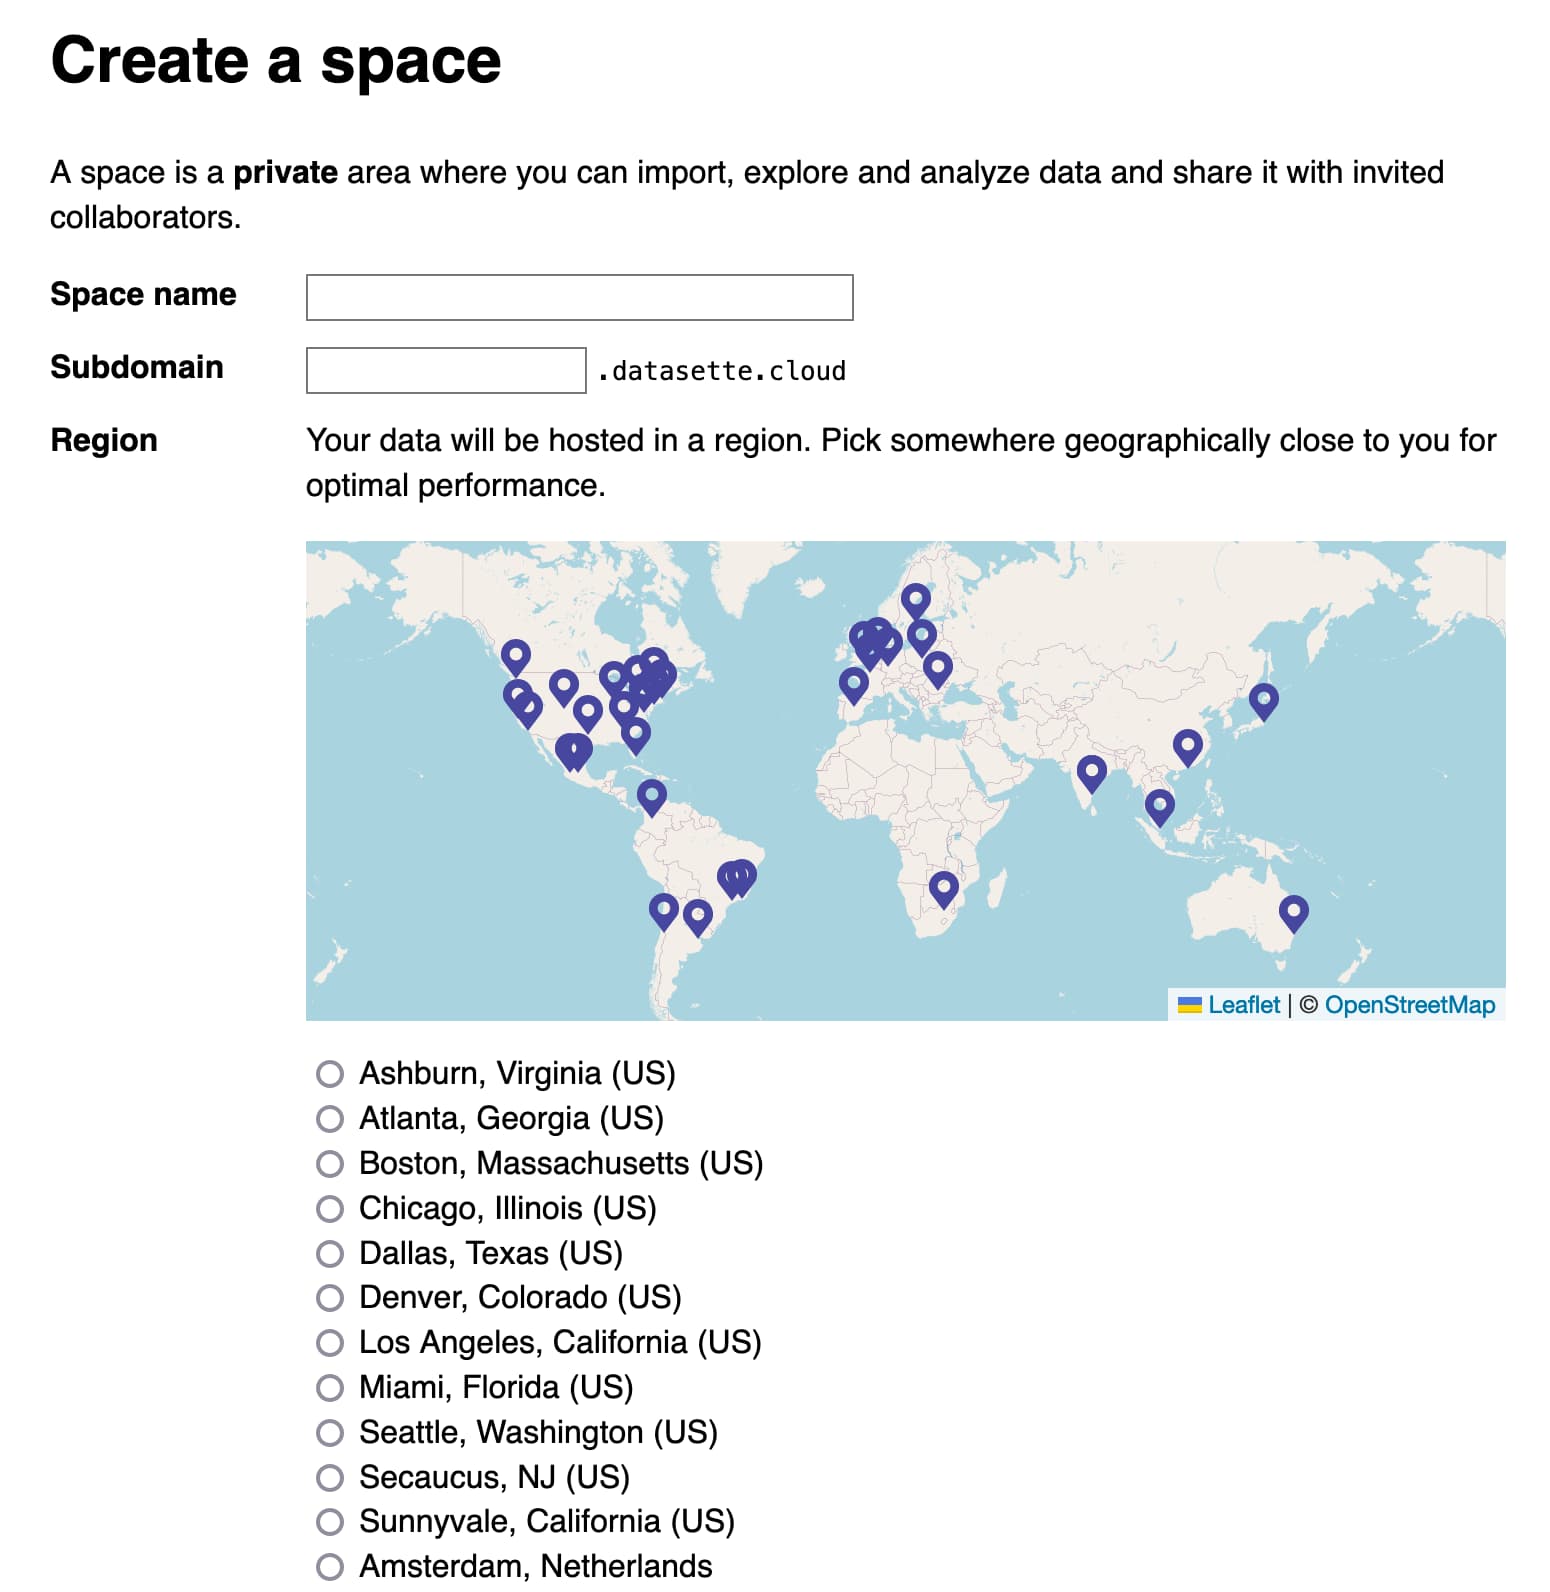 Create a space A space is a private area where you can import, explore and analyze data and share it with invited collaborators. Space name Subdomain Region  .datasette.cloud  Your data will be hosted in a region. Pick somewhere geographically close to you for optimal performance.